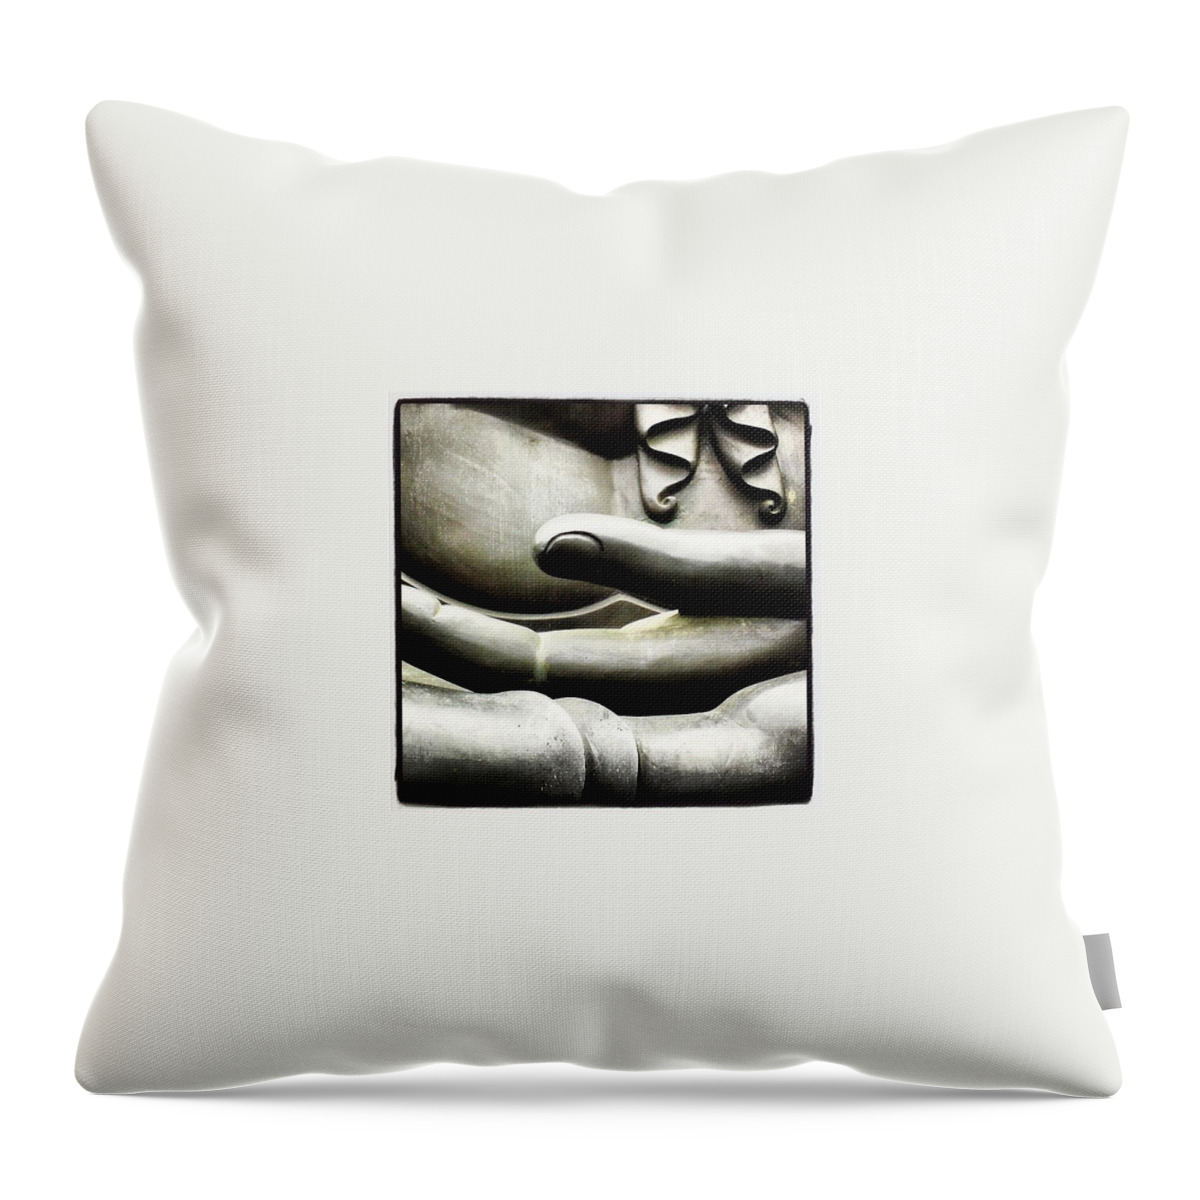  Throw Pillow featuring the photograph Buddha's Hand by Lorelle Phoenix